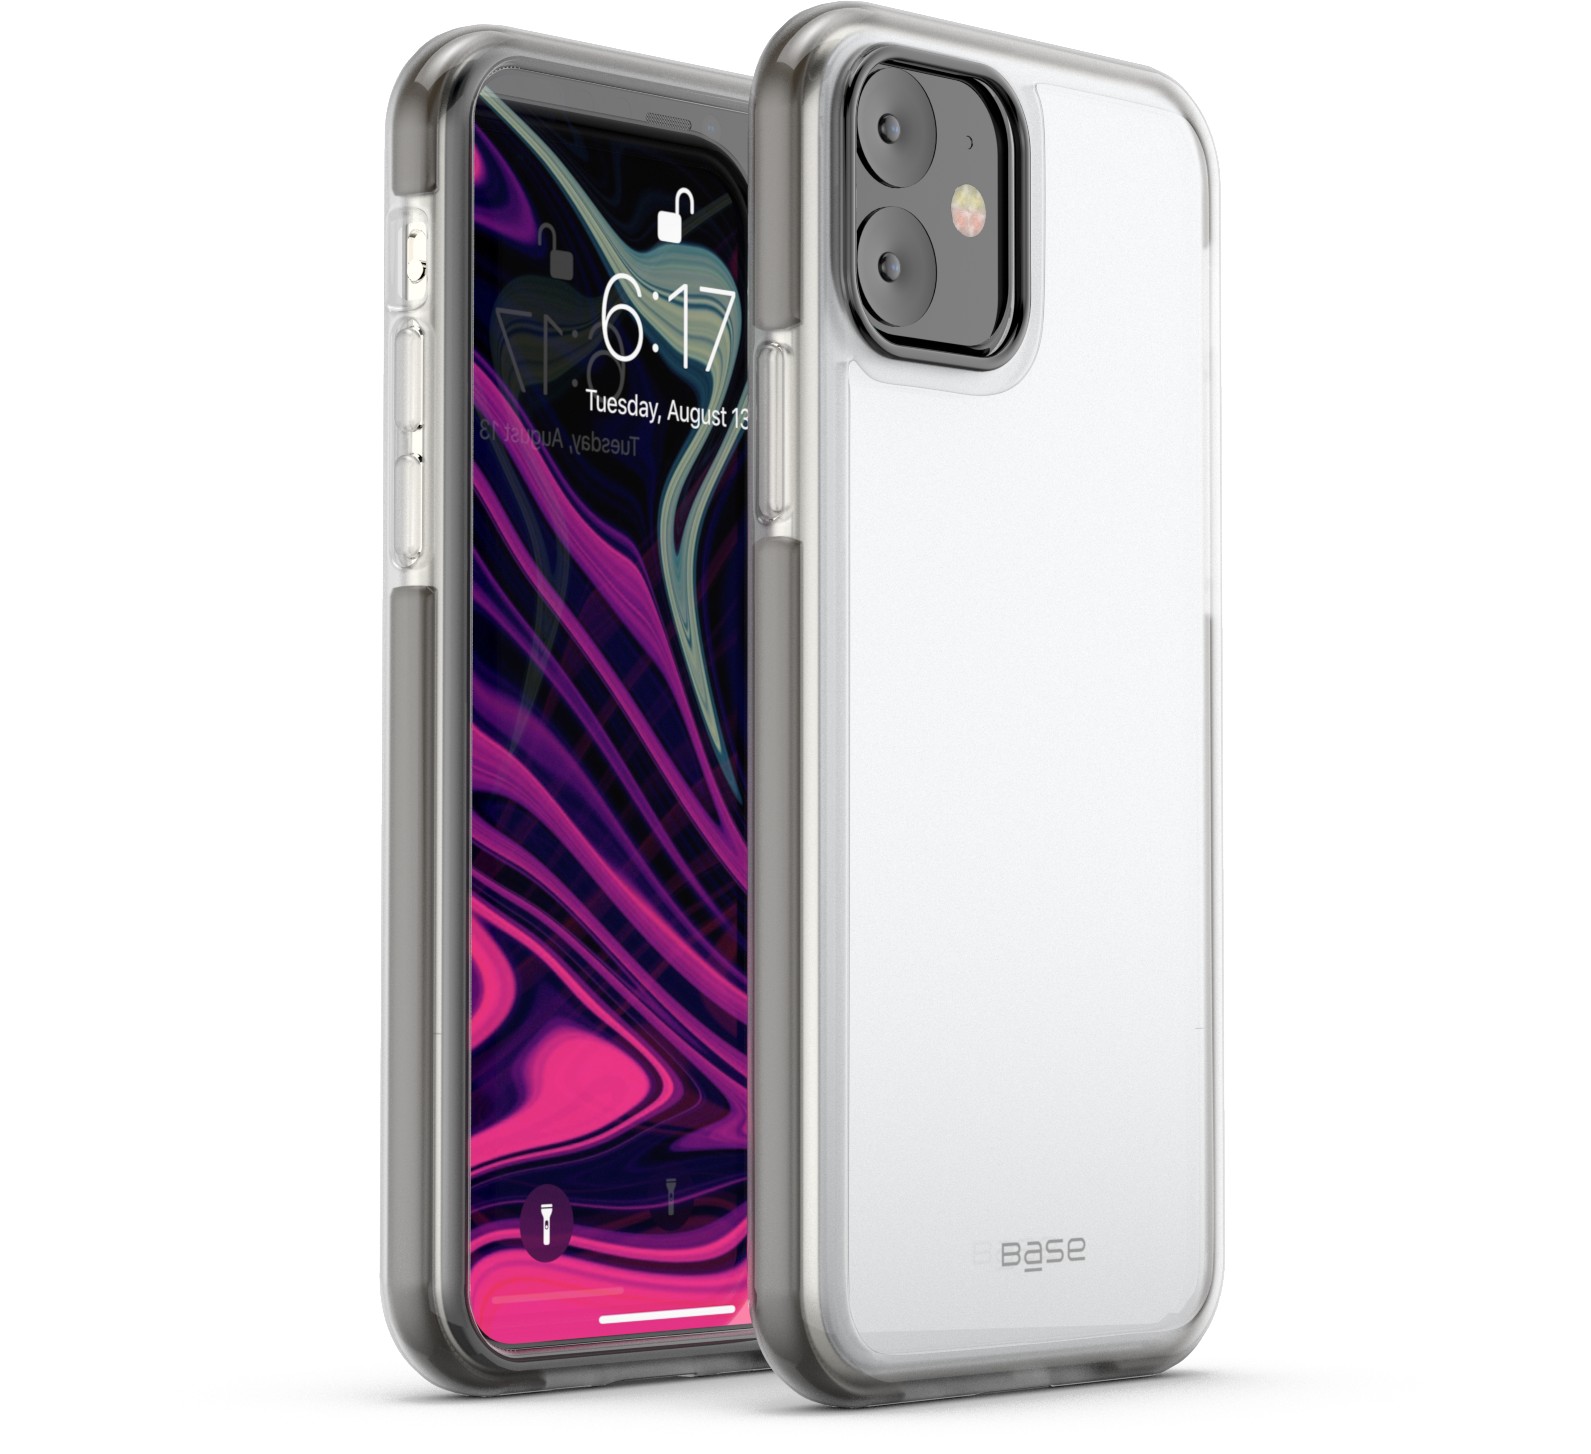 Clear slim case protector with grey edges For iPhone 11 cell phones